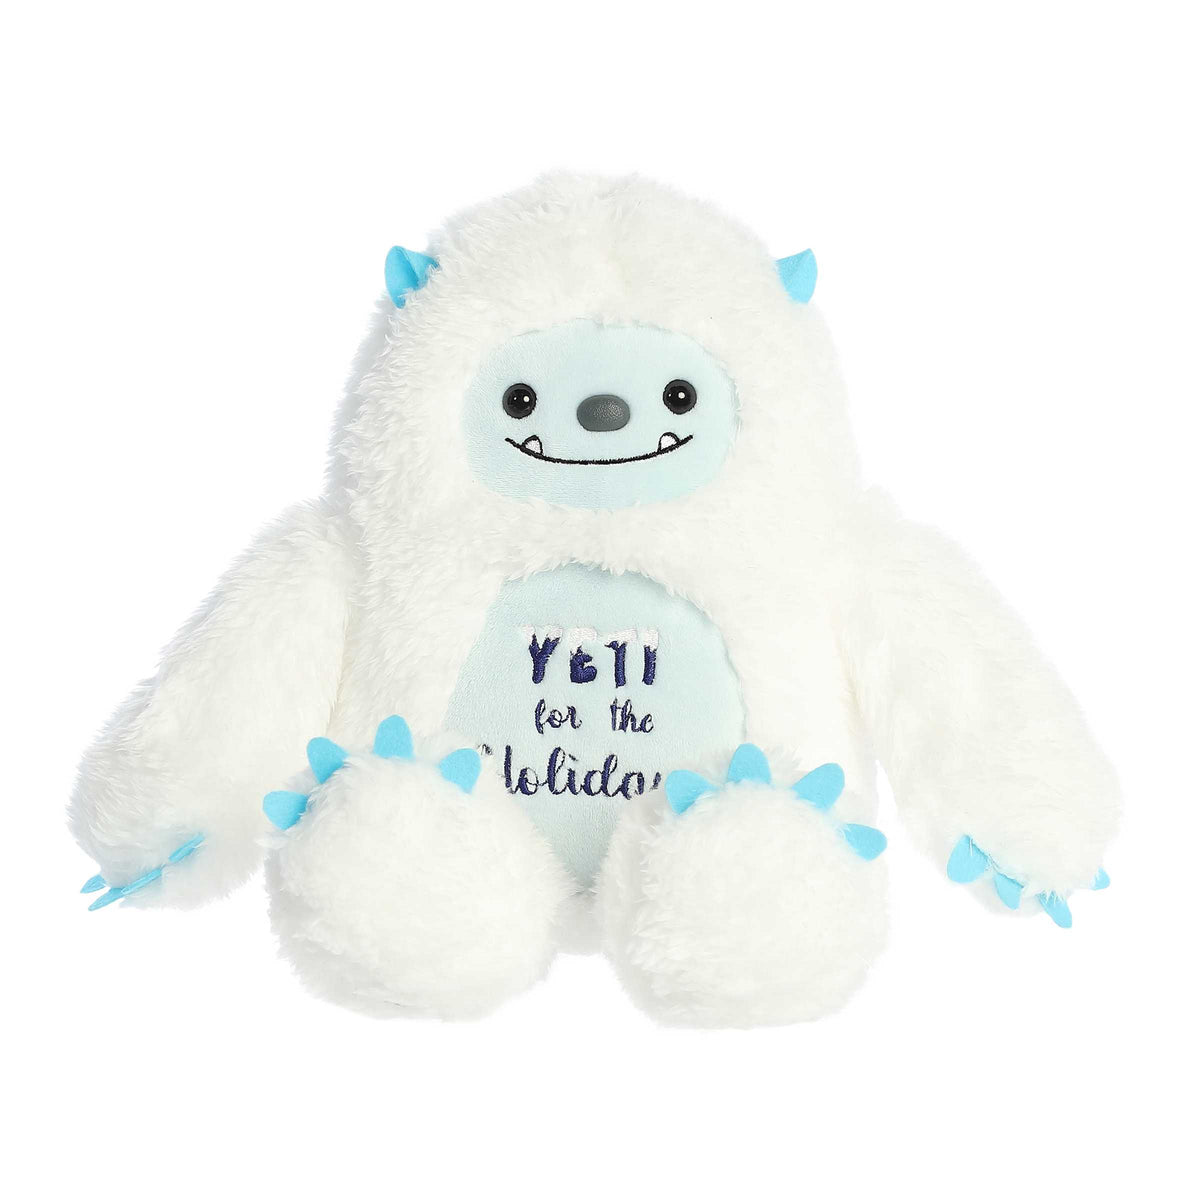 Yeti stuffed animal with bright blue accents and tummy embroidered with "Yeti for the Holidays" in a festive snowy font.